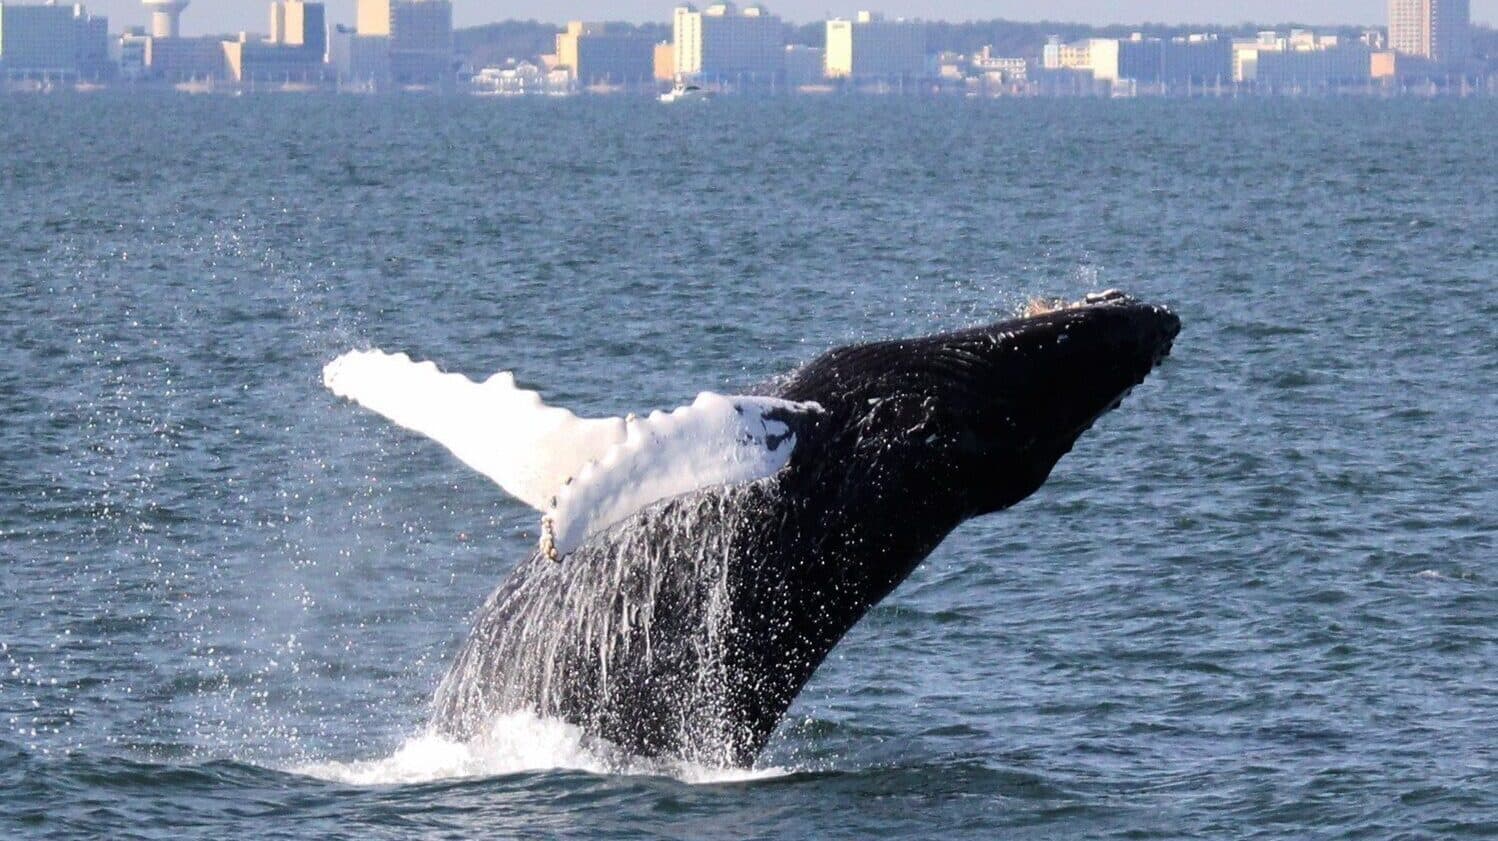 A whale breachs in front of the Virginia Beach coastline.